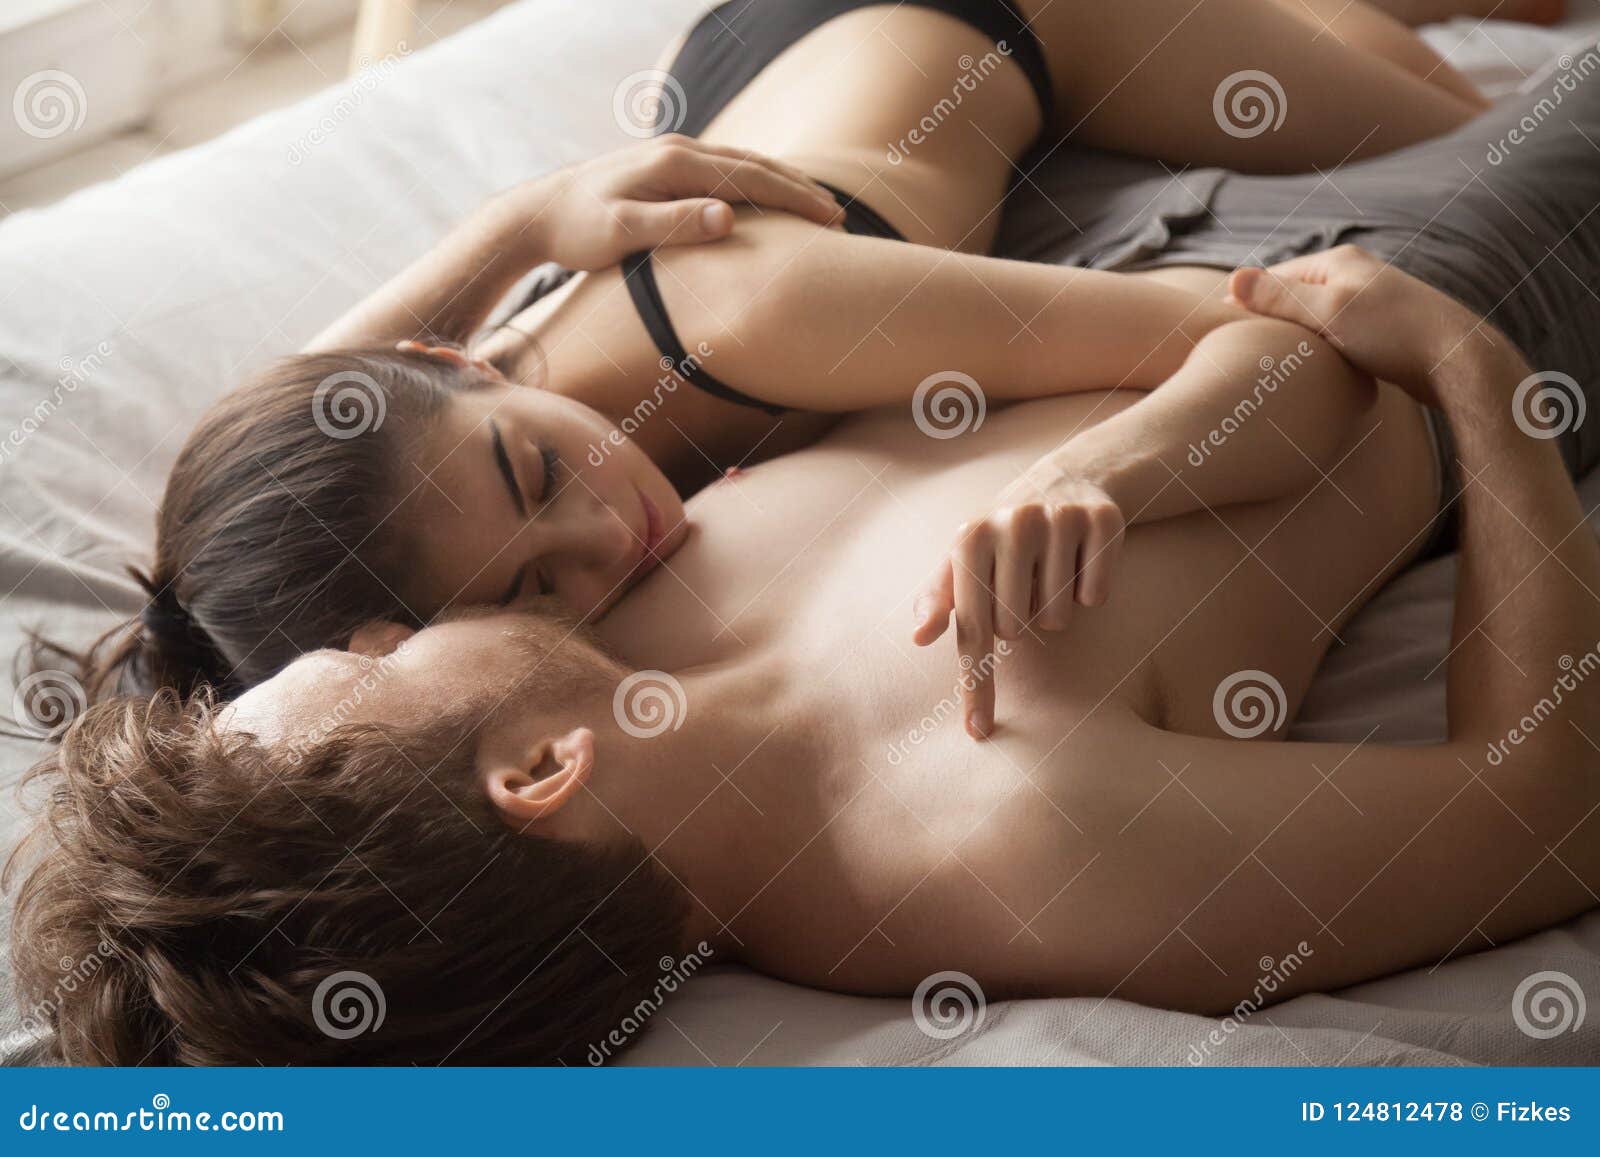 Romantic Couple Lying In Bed Embracing After Love Making Stock Photo 124812478 pic